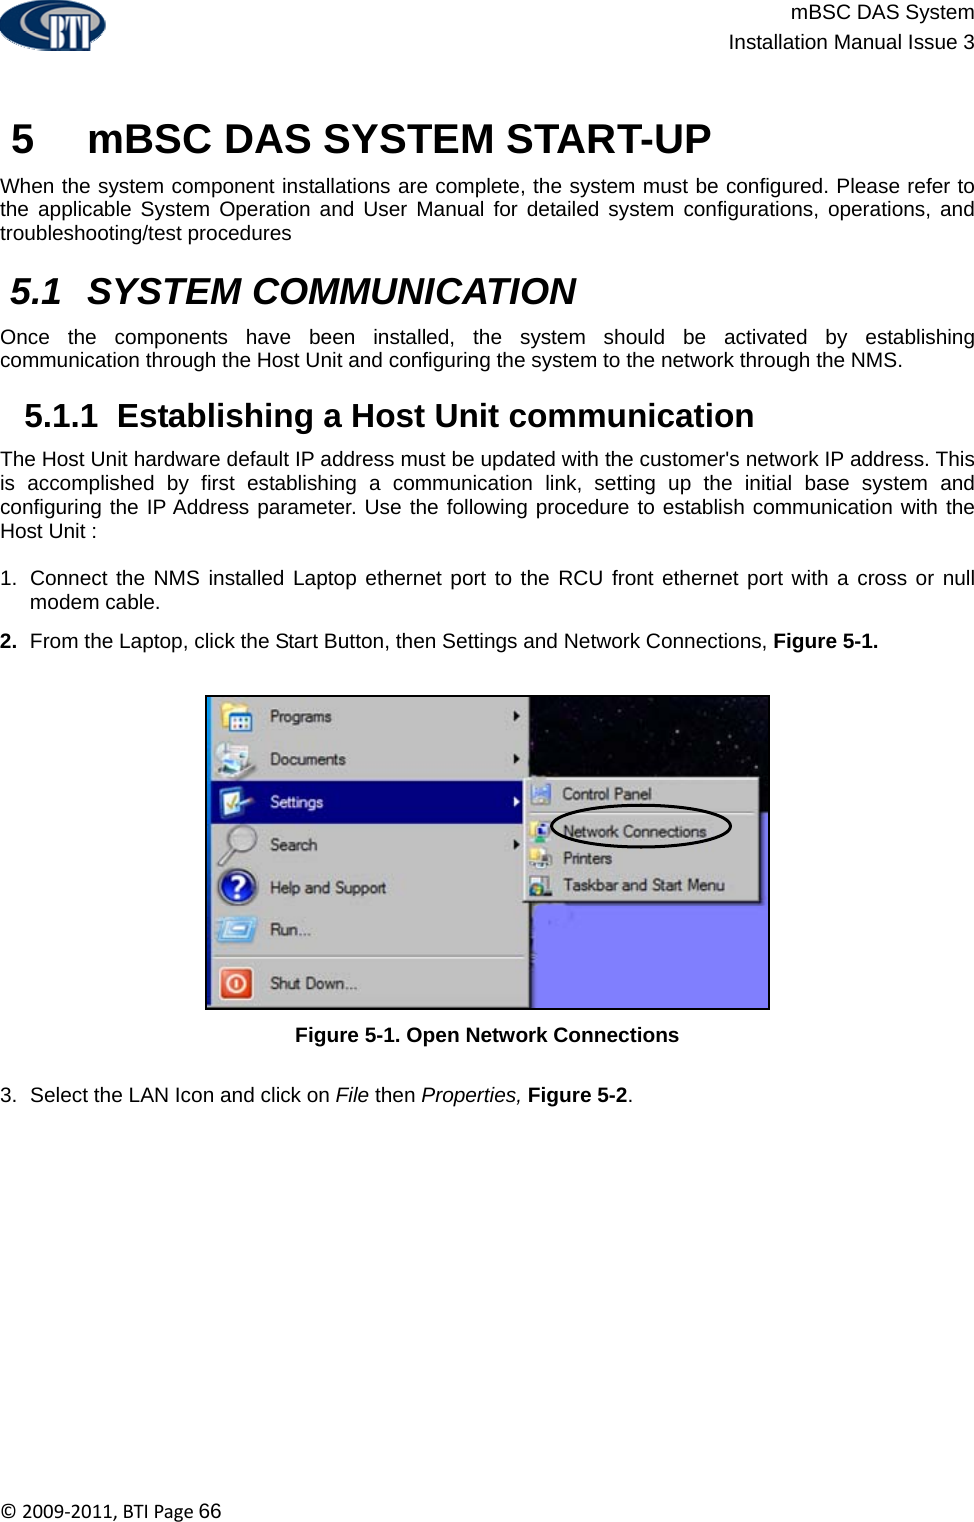                          mBSC DAS System  Installation Manual Issue 3  ©2009‐2011,BTIPage66    5   mBSC DAS SYSTEM START-UP When the system component installations are complete, the system must be configured. Please refer to the applicable System Operation and User Manual for detailed system configurations, operations, and troubleshooting/test procedures    5.1  SYSTEM COMMUNICATION Once the components have been installed, the system should be activated by establishing communication through the Host Unit and configuring the system to the network through the NMS.   5.1.1  Establishing a Host Unit communication The Host Unit hardware default IP address must be updated with the customer&apos;s network IP address. This is accomplished by first establishing a communication link, setting up the initial base system and configuring the IP Address parameter. Use the following procedure to establish communication with the Host Unit :  1.  Connect the NMS installed Laptop ethernet port to the RCU front ethernet port with a cross or null modem cable. 2.  From the Laptop, click the Start Button, then Settings and Network Connections, Figure 5-1.  Figure 5-1. Open Network Connections  3.  Select the LAN Icon and click on File then Properties, Figure 5-2. 